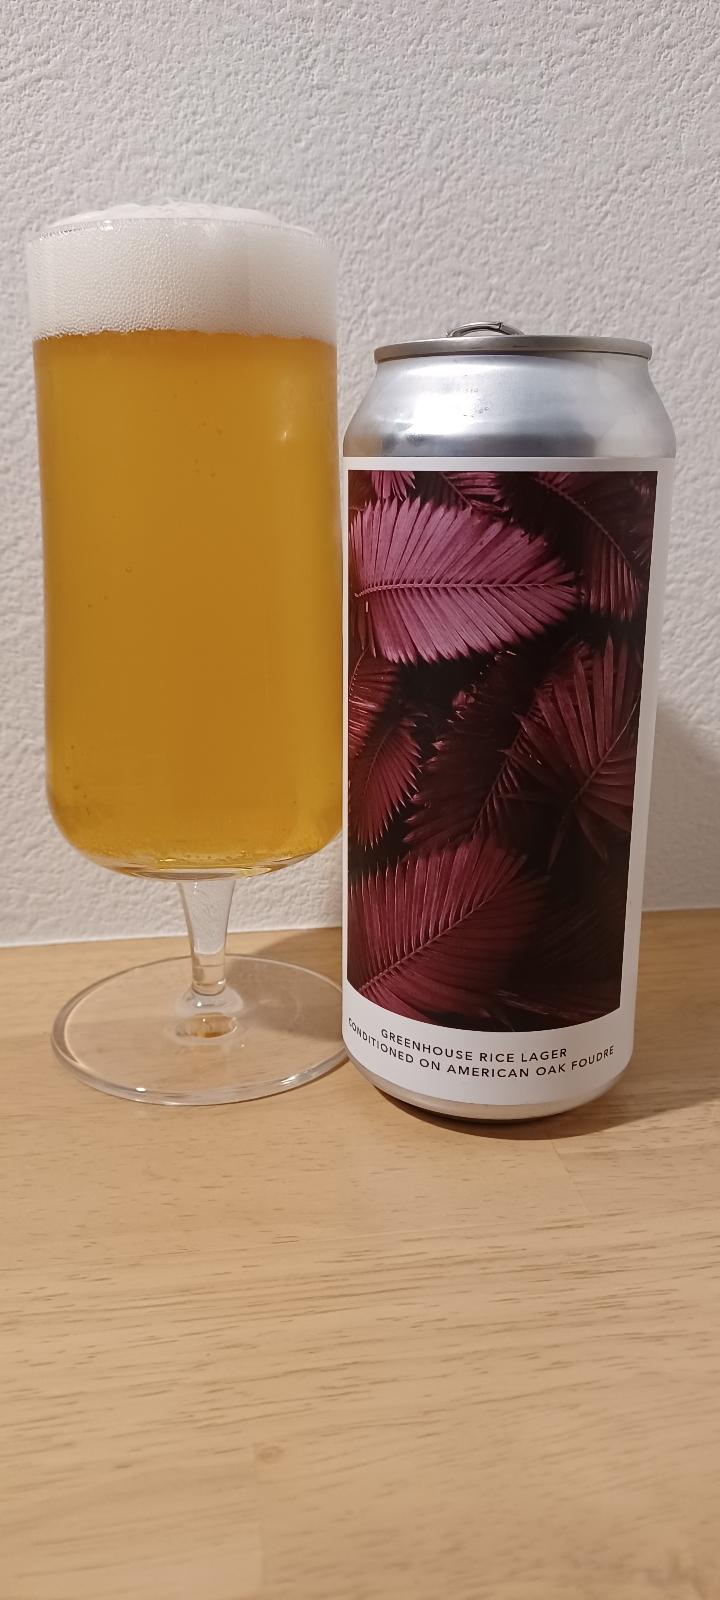 Greenhouse Rice Lager (American Oak Foudre Aged)